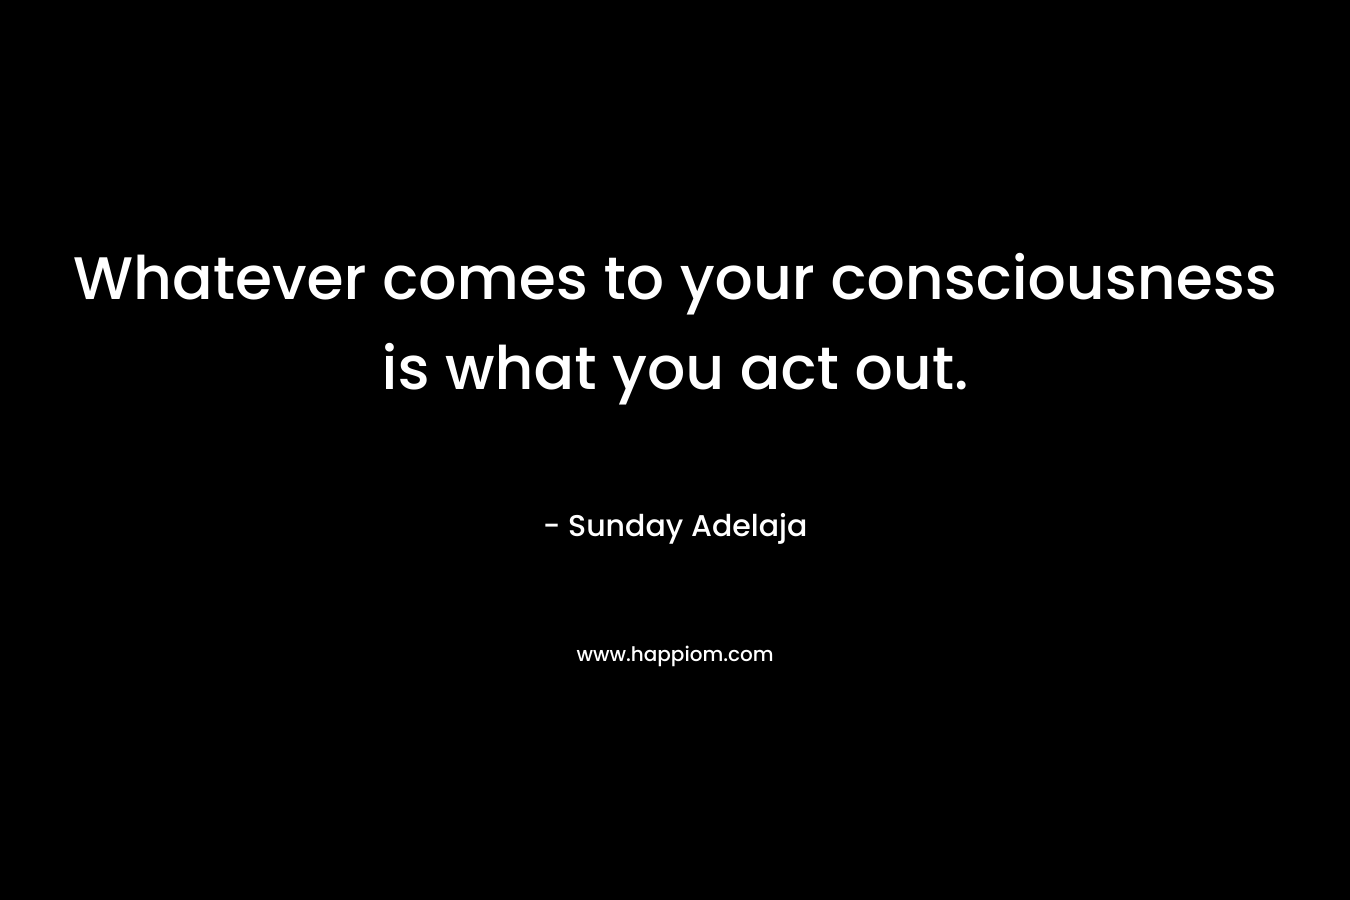 Whatever comes to your consciousness is what you act out.